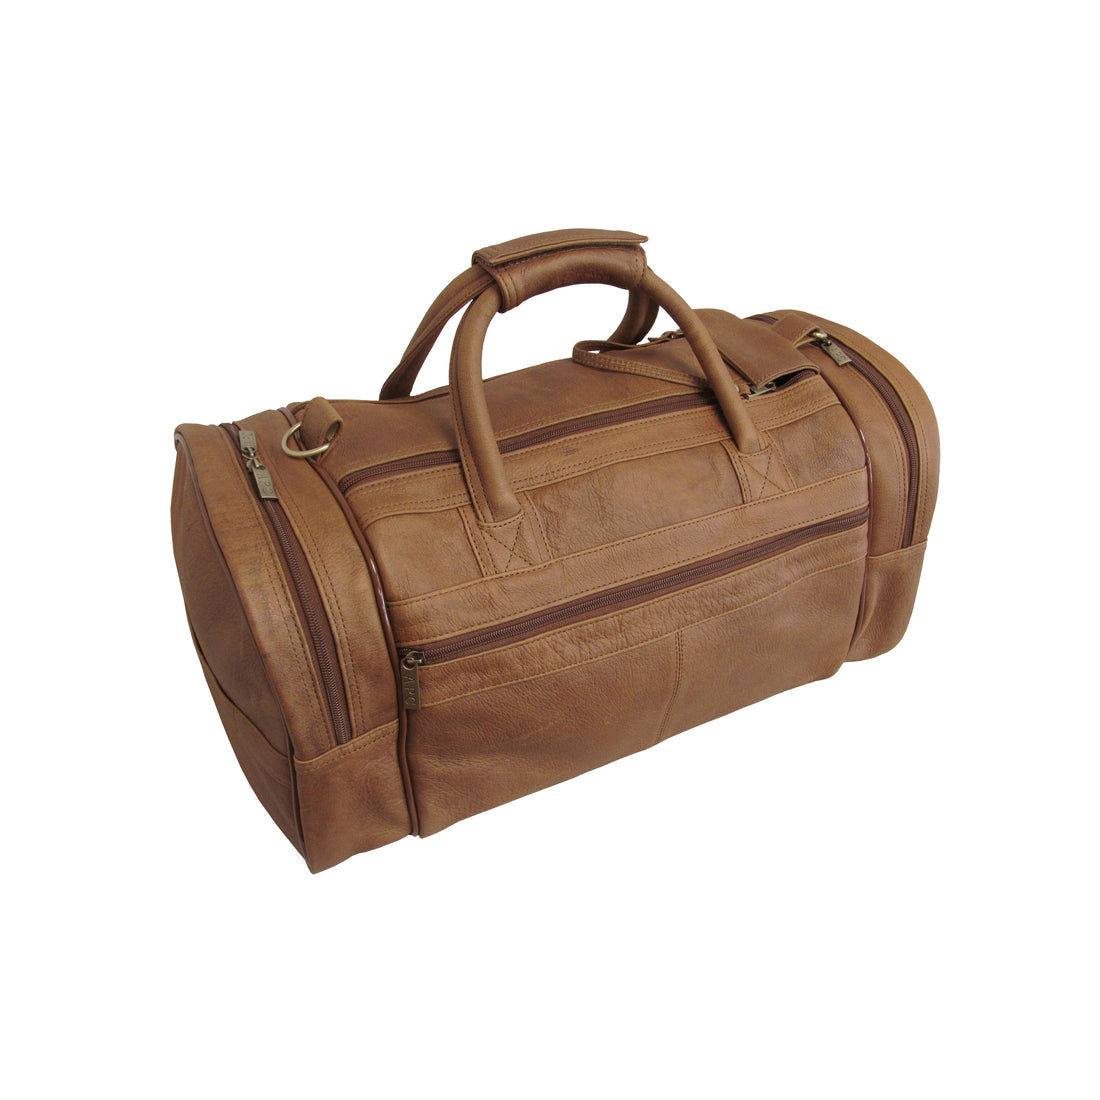 Amerileather Distressed Brown Leather 20-inch Dual Zippered Duffel (#3704-2)